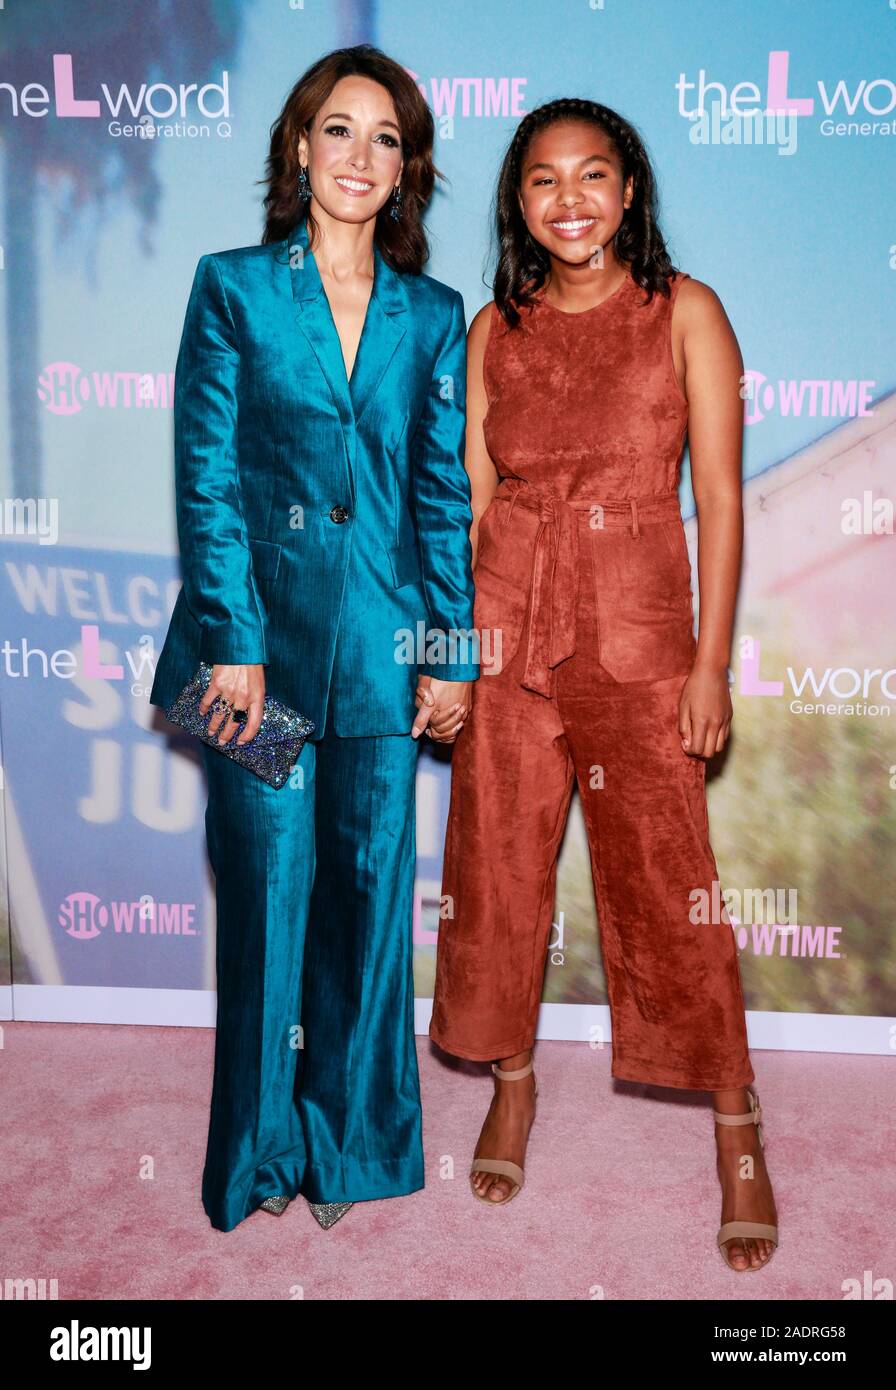 Los Angeles, CA - December 02, 2019: Jennifer Beals and Jordan Hull attend the premiere of Showtime's 'The L Word: Generation Q' at the Regal LA Live Stock Photo